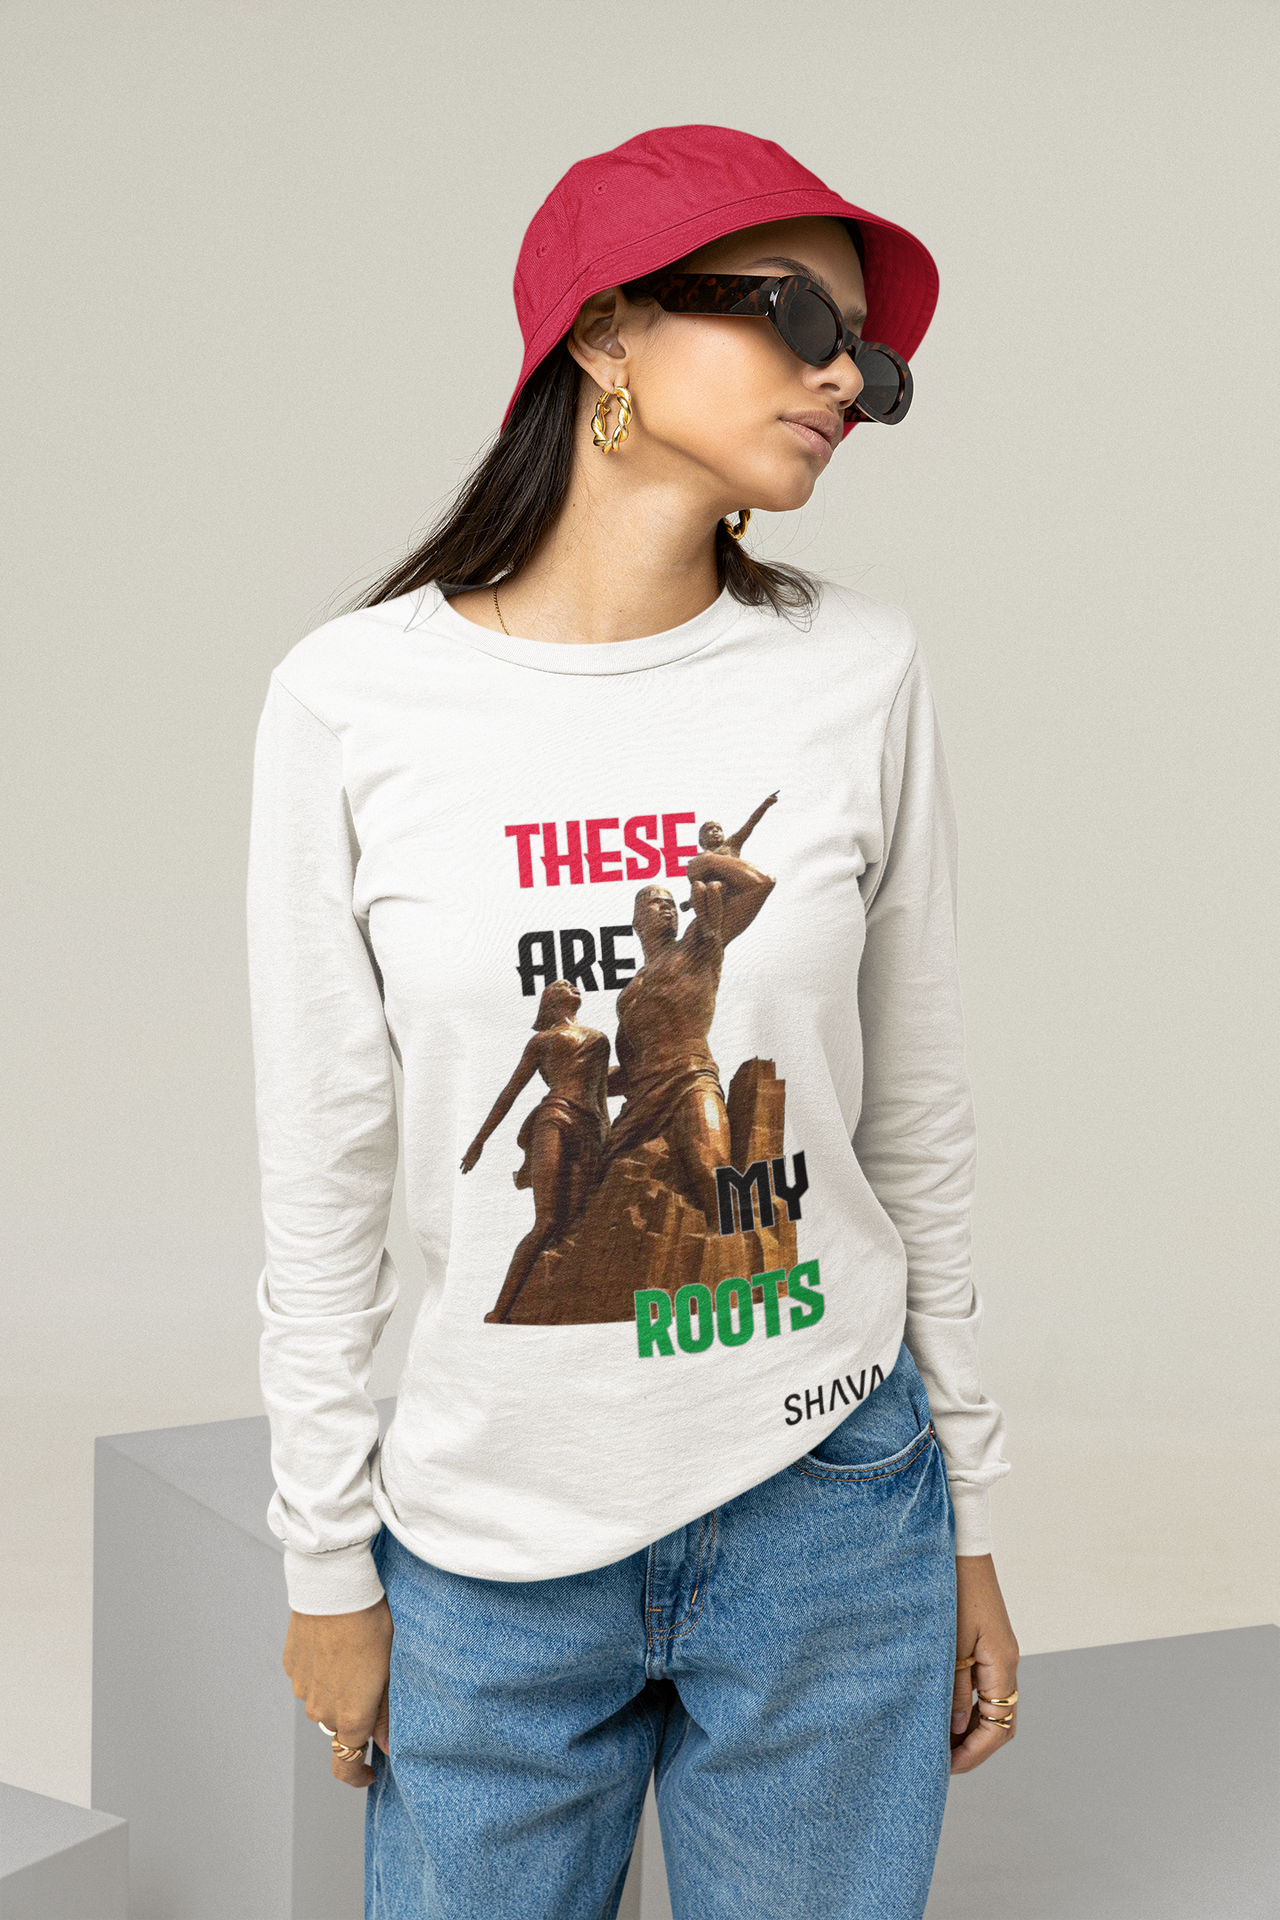 Affirmation Feminist Pro Choice Long Sleeve Shirt Women’s Size - These are My Roots Printify